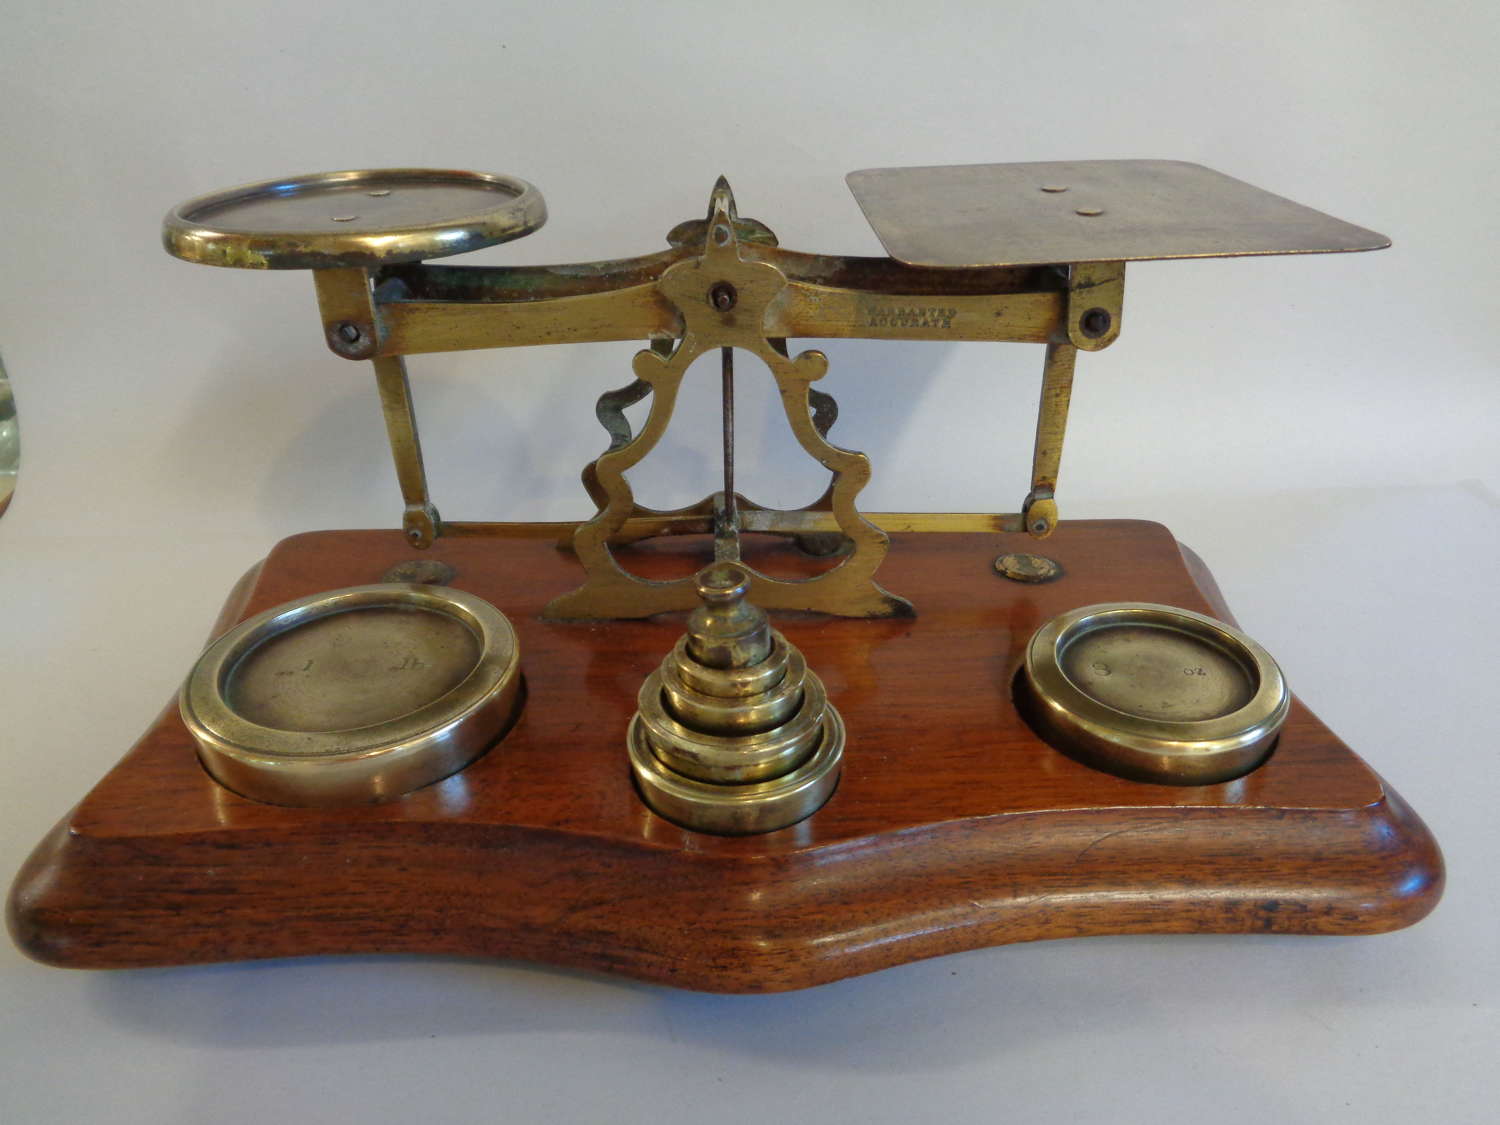 Antique Mechanical Scales with Weights